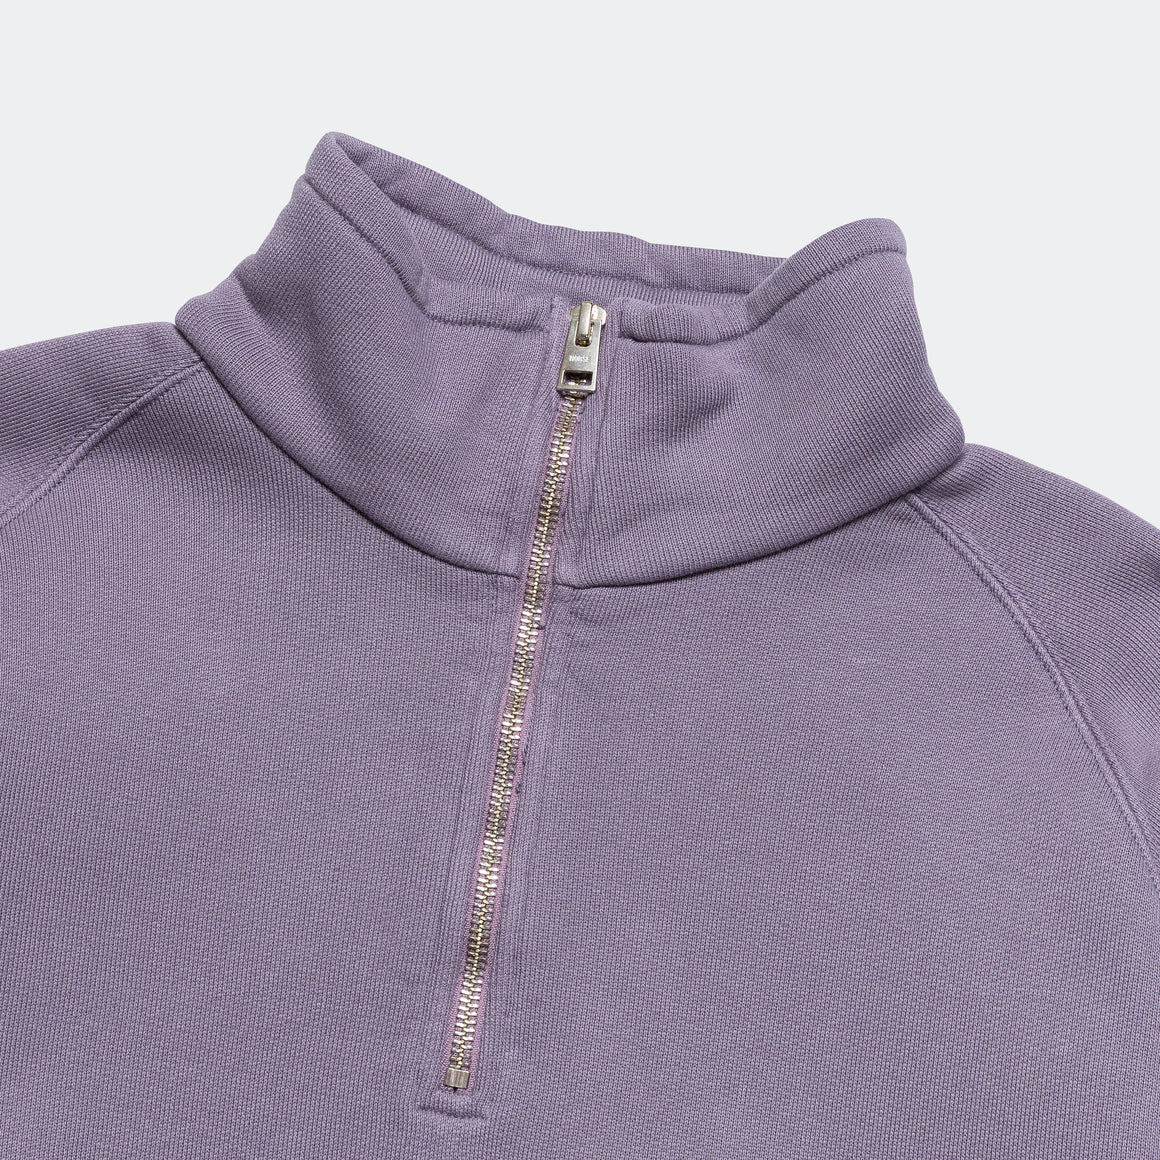 Norse Projects - Marten Relaxed Organic Raglan Half Zip - Dusk Purple - UP THERE